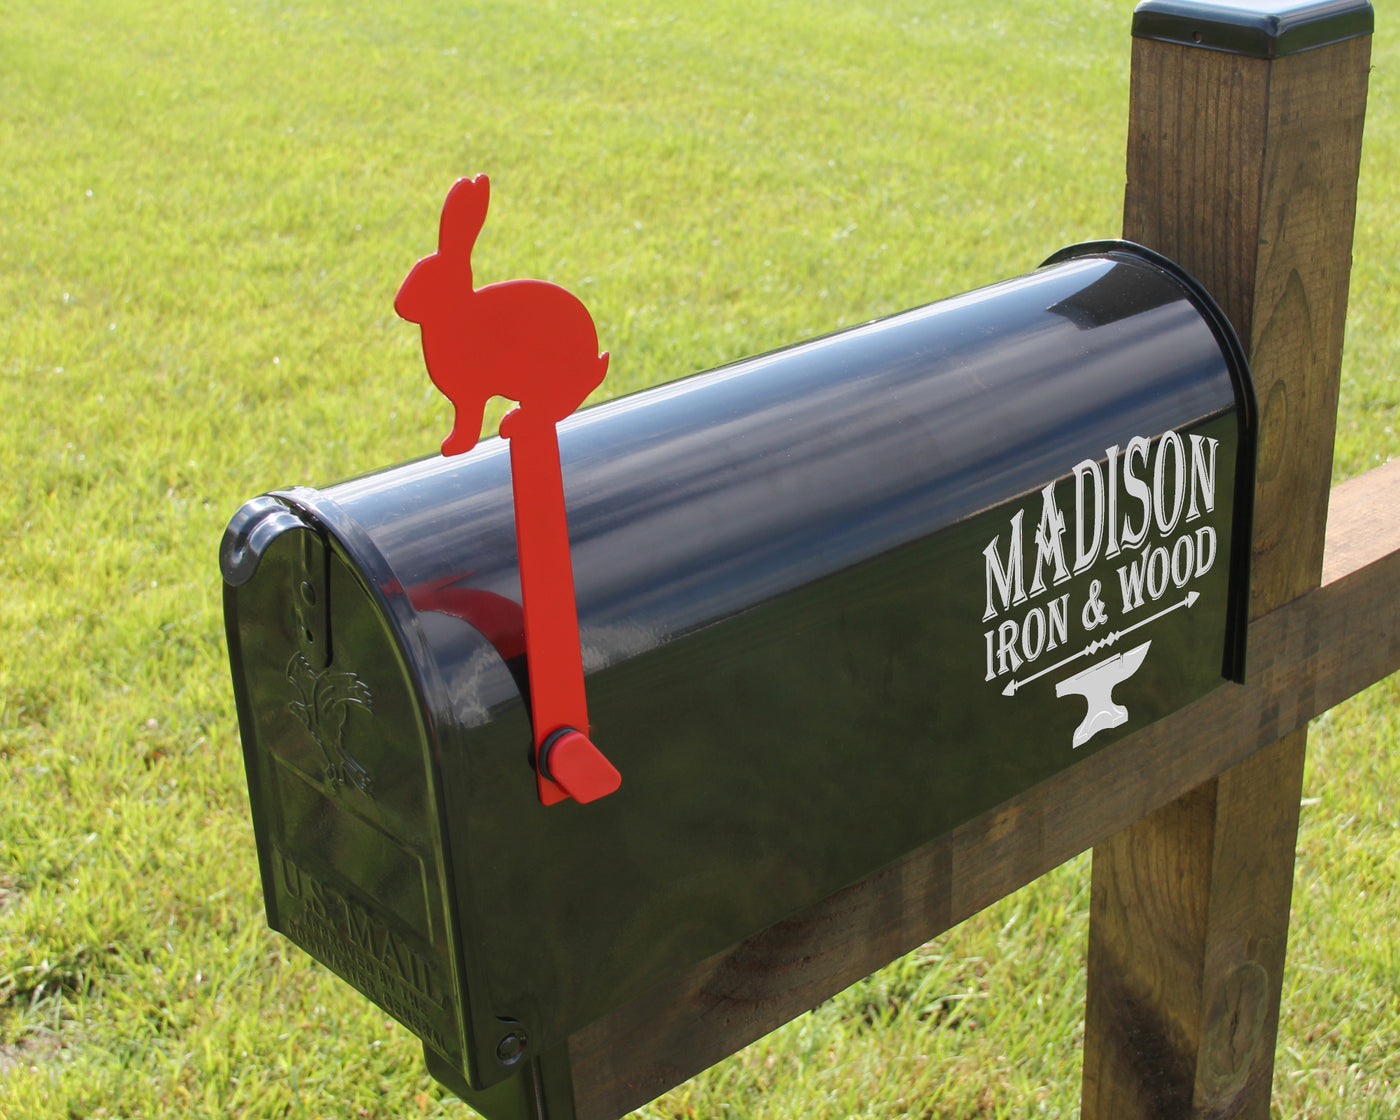 Bunny Mailbox Flag - Madison Iron and Wood - Mailbox Post Decor - metal outdoor decor - Steel deocrations - american made products - veteran owned business products - fencing decorations - fencing supplies - custom wall decorations - personalized wall signs - steel - decorative post caps - steel post caps - metal post caps - brackets - structural brackets - home improvement - easter - easter decorations - easter gift - easter yard decor